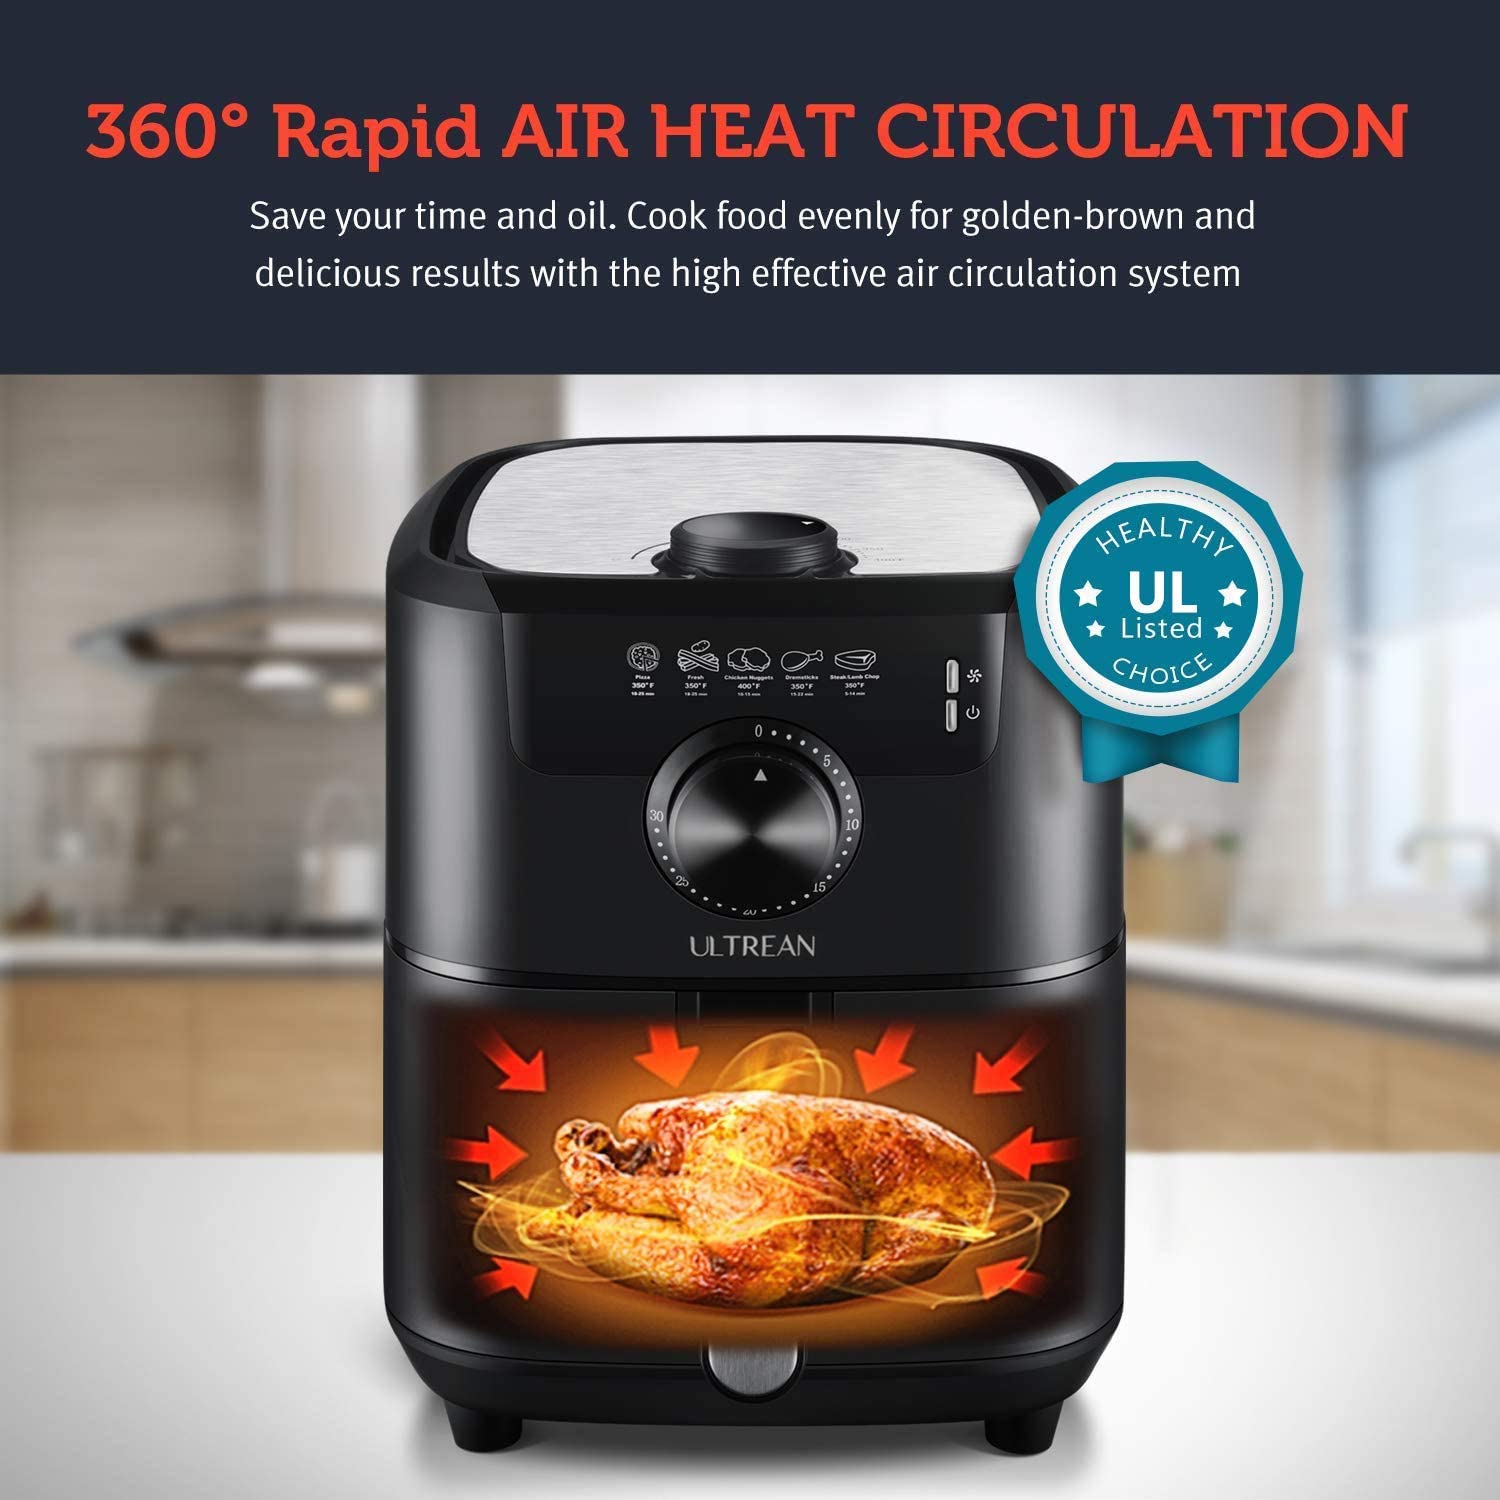 https://discounttoday.net/wp-content/uploads/2022/10/1Ultrean-AF02-Air-Fryer-Electric-Hot-Air-Fryers-Oven-Cooker-with-Deluxe-Temperature-and-Time-Knob-4.5-Quart-Non-Stick-Basket50-Recipes-UL-Certified-1-Year-Warranty-1500w.jpg